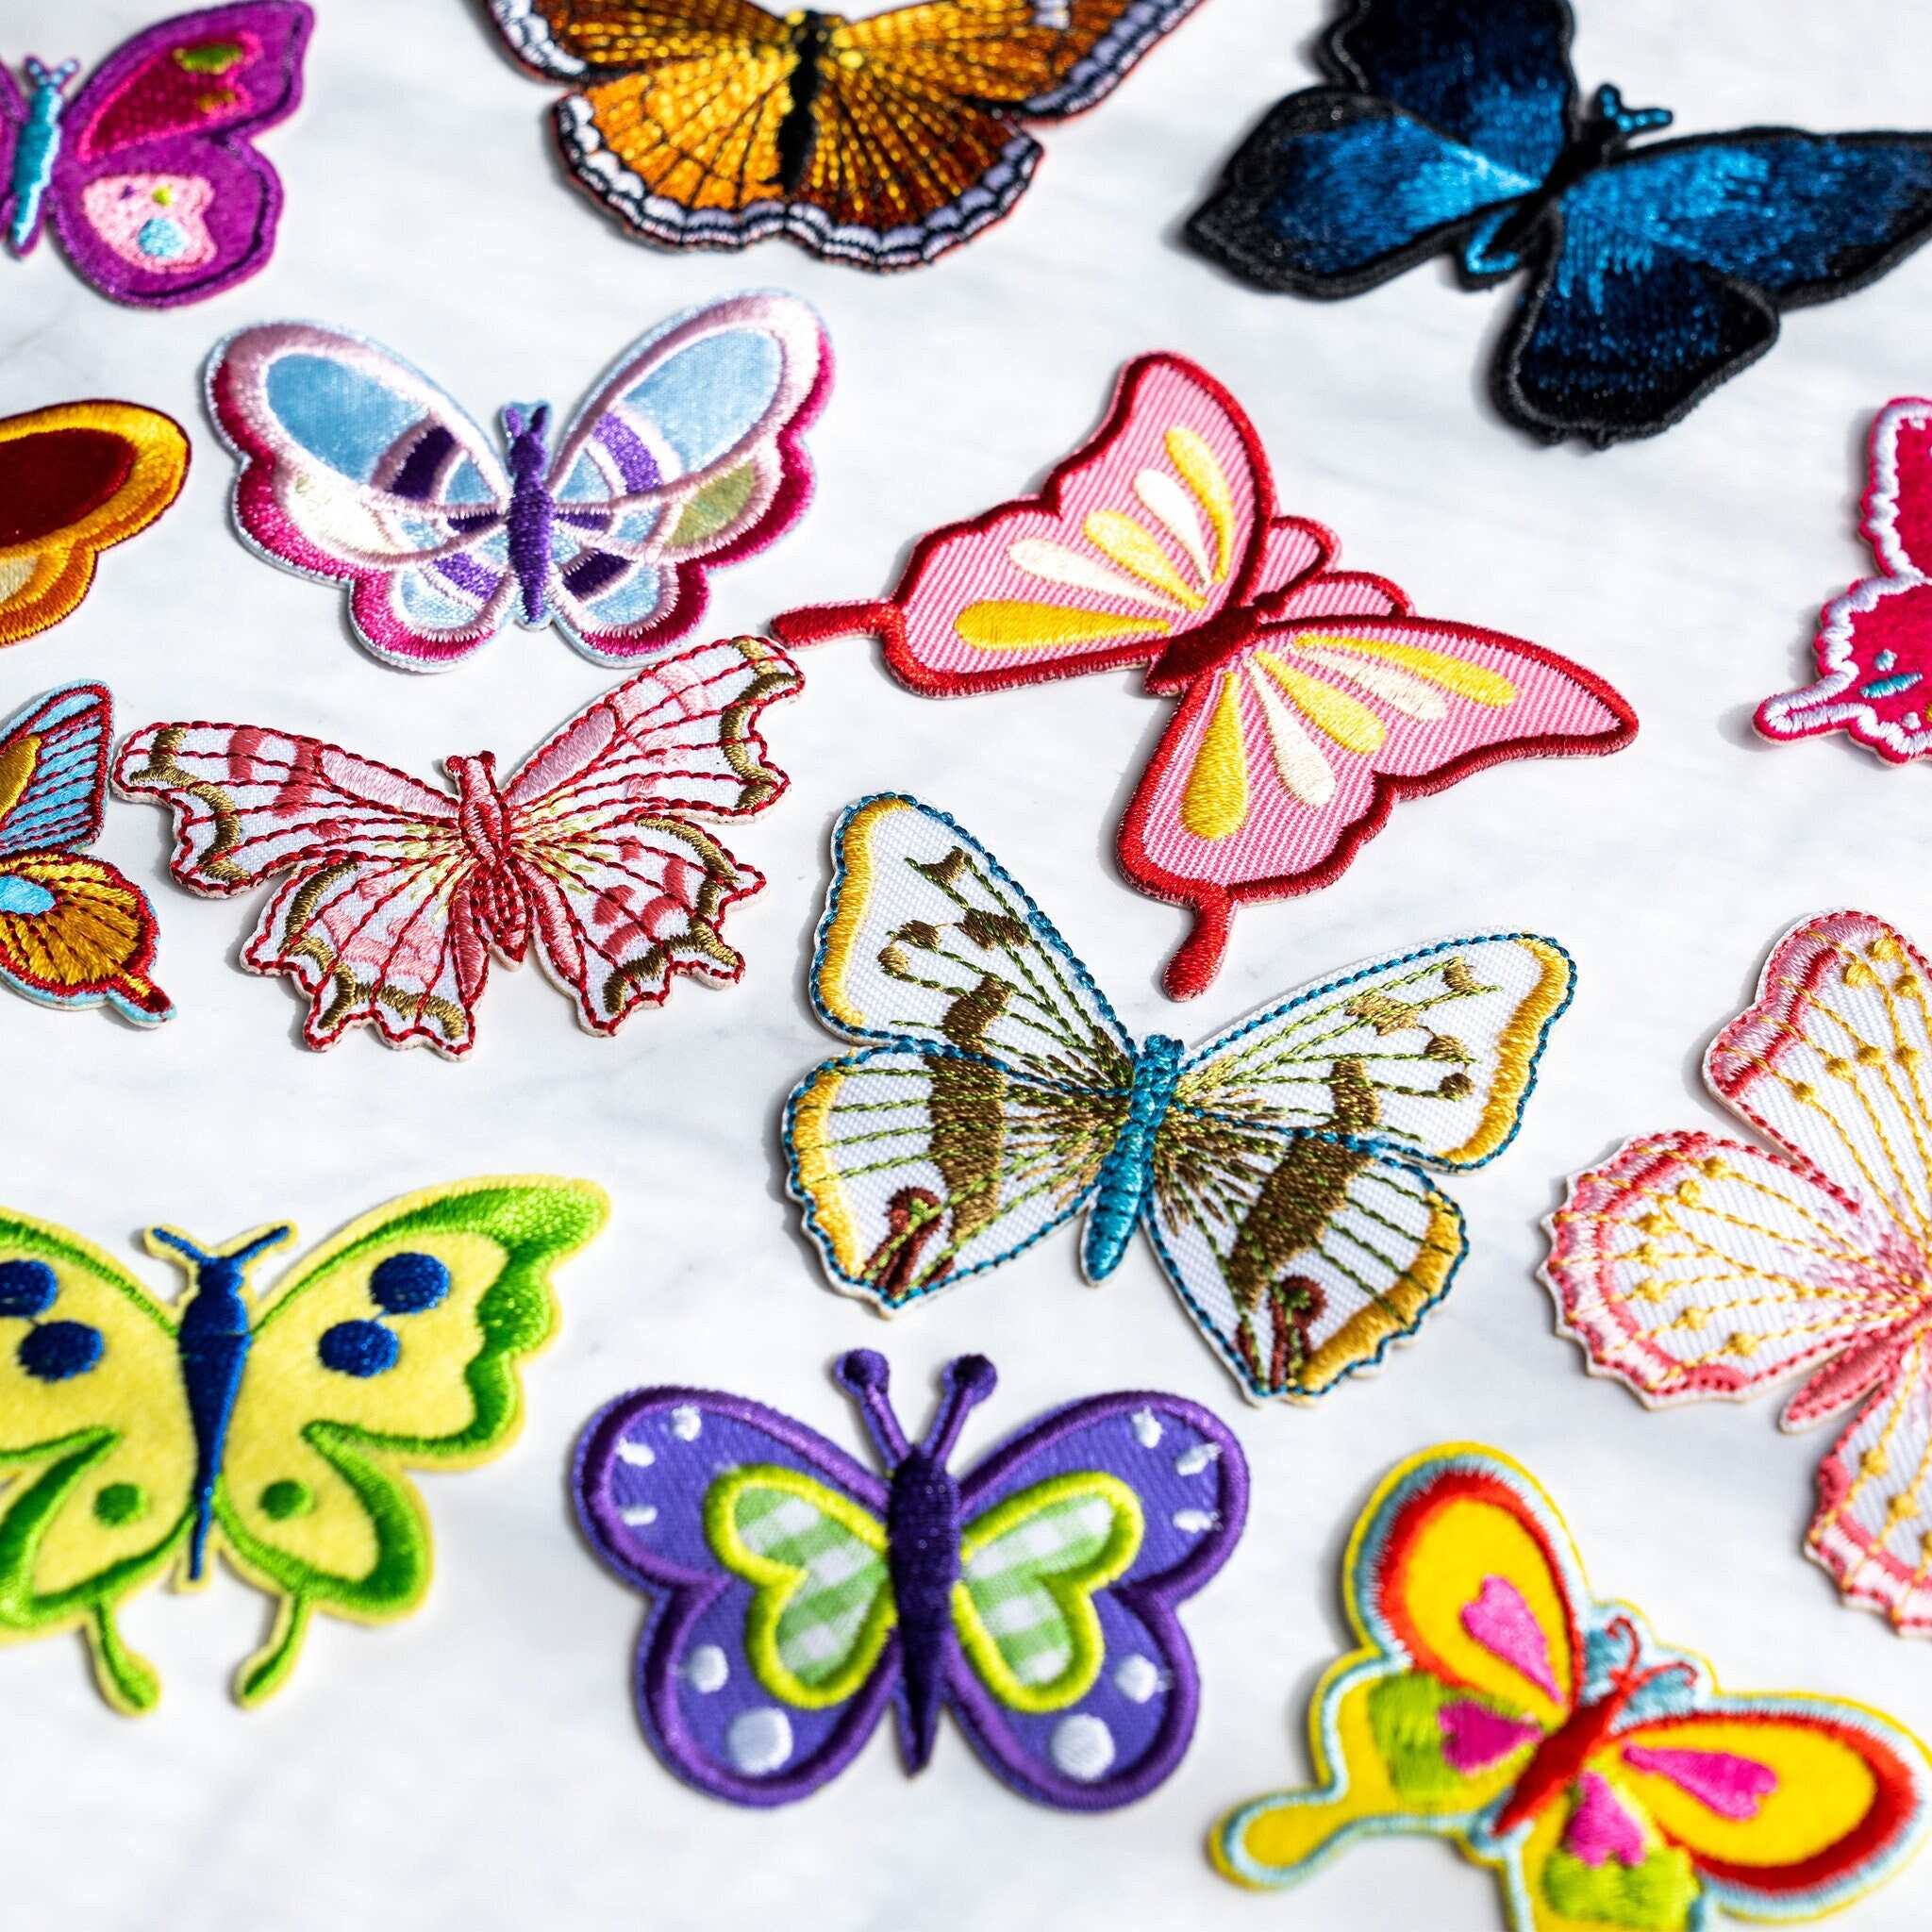 Iron on Patches Butterfly Colorful 8,9x6,5 Application Embroided Badges 